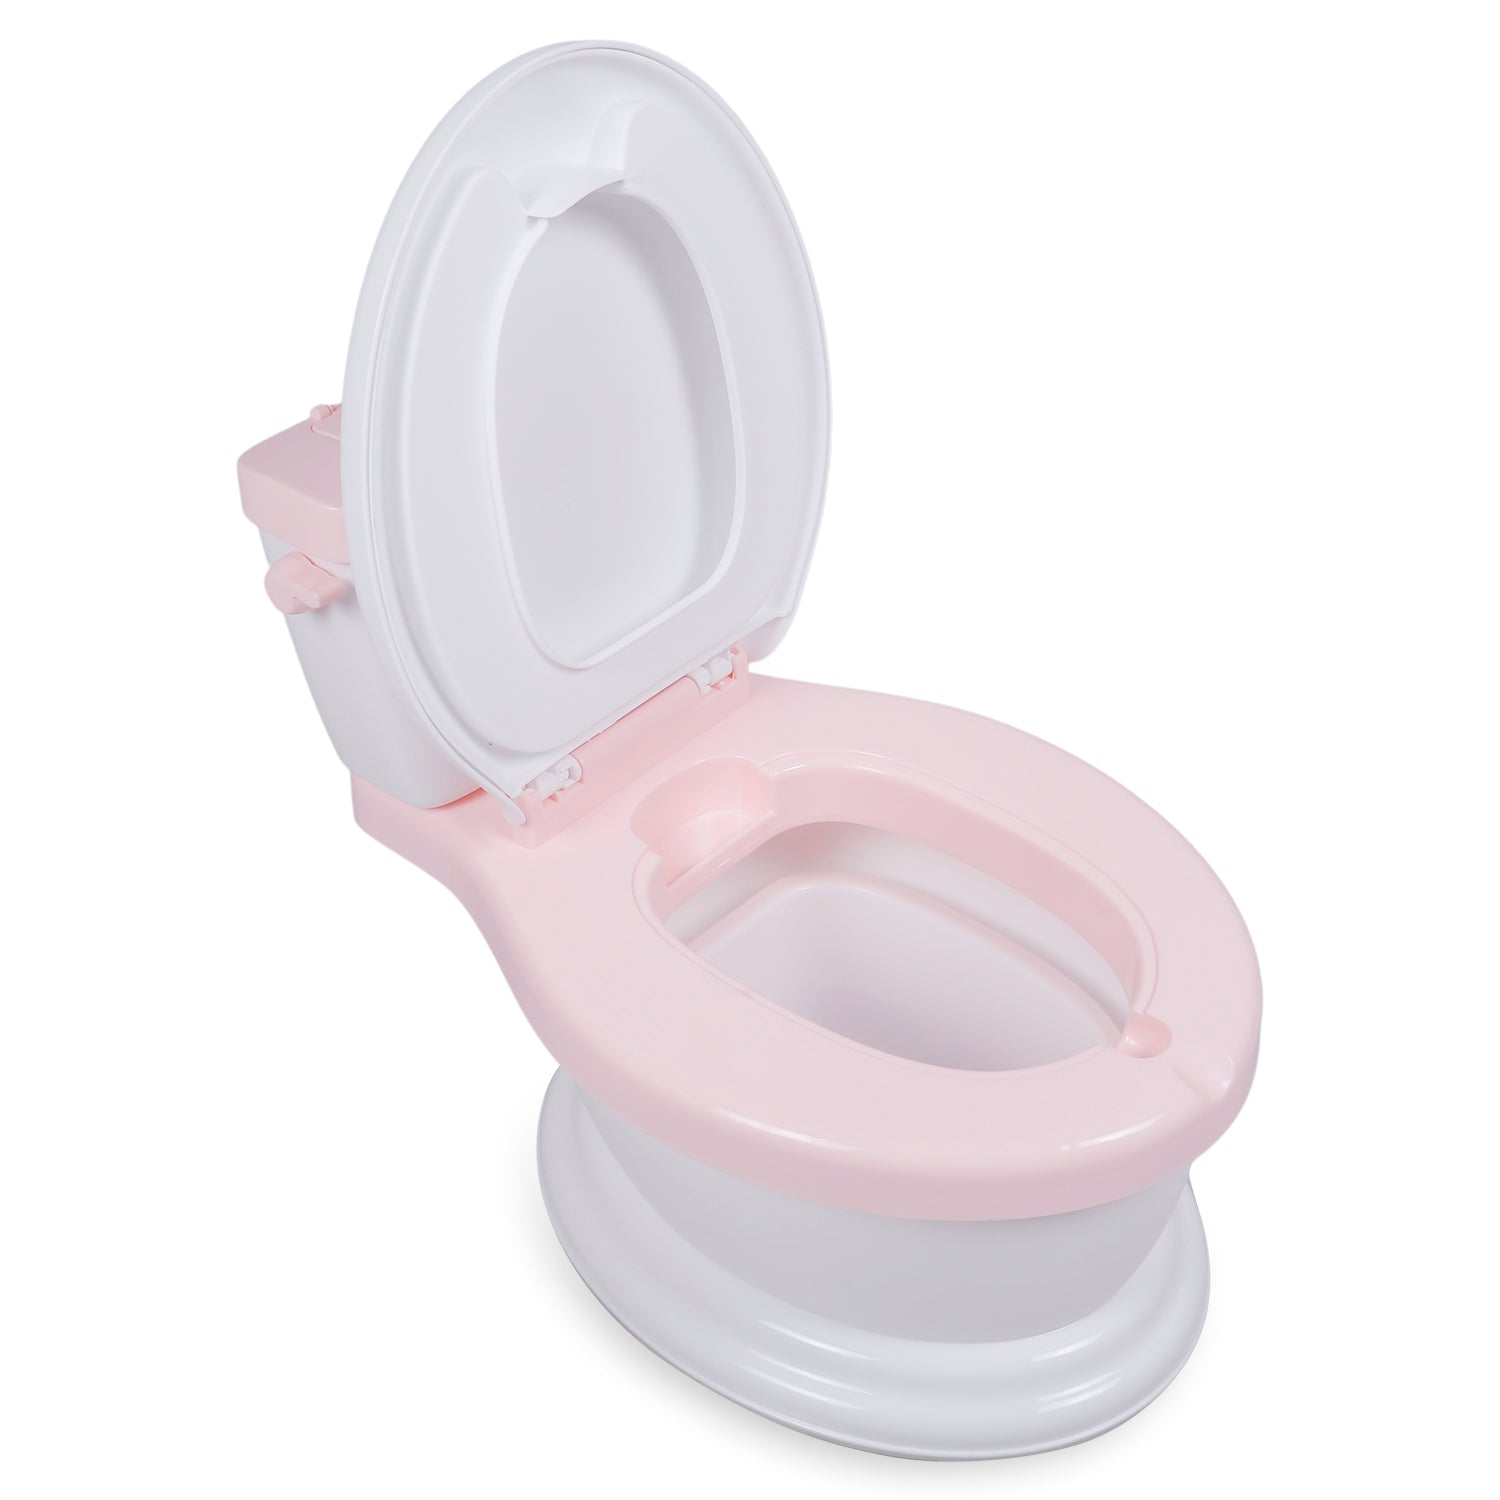 Baby Moo Toilet Training Potty Chair Realistic Western Style Pink